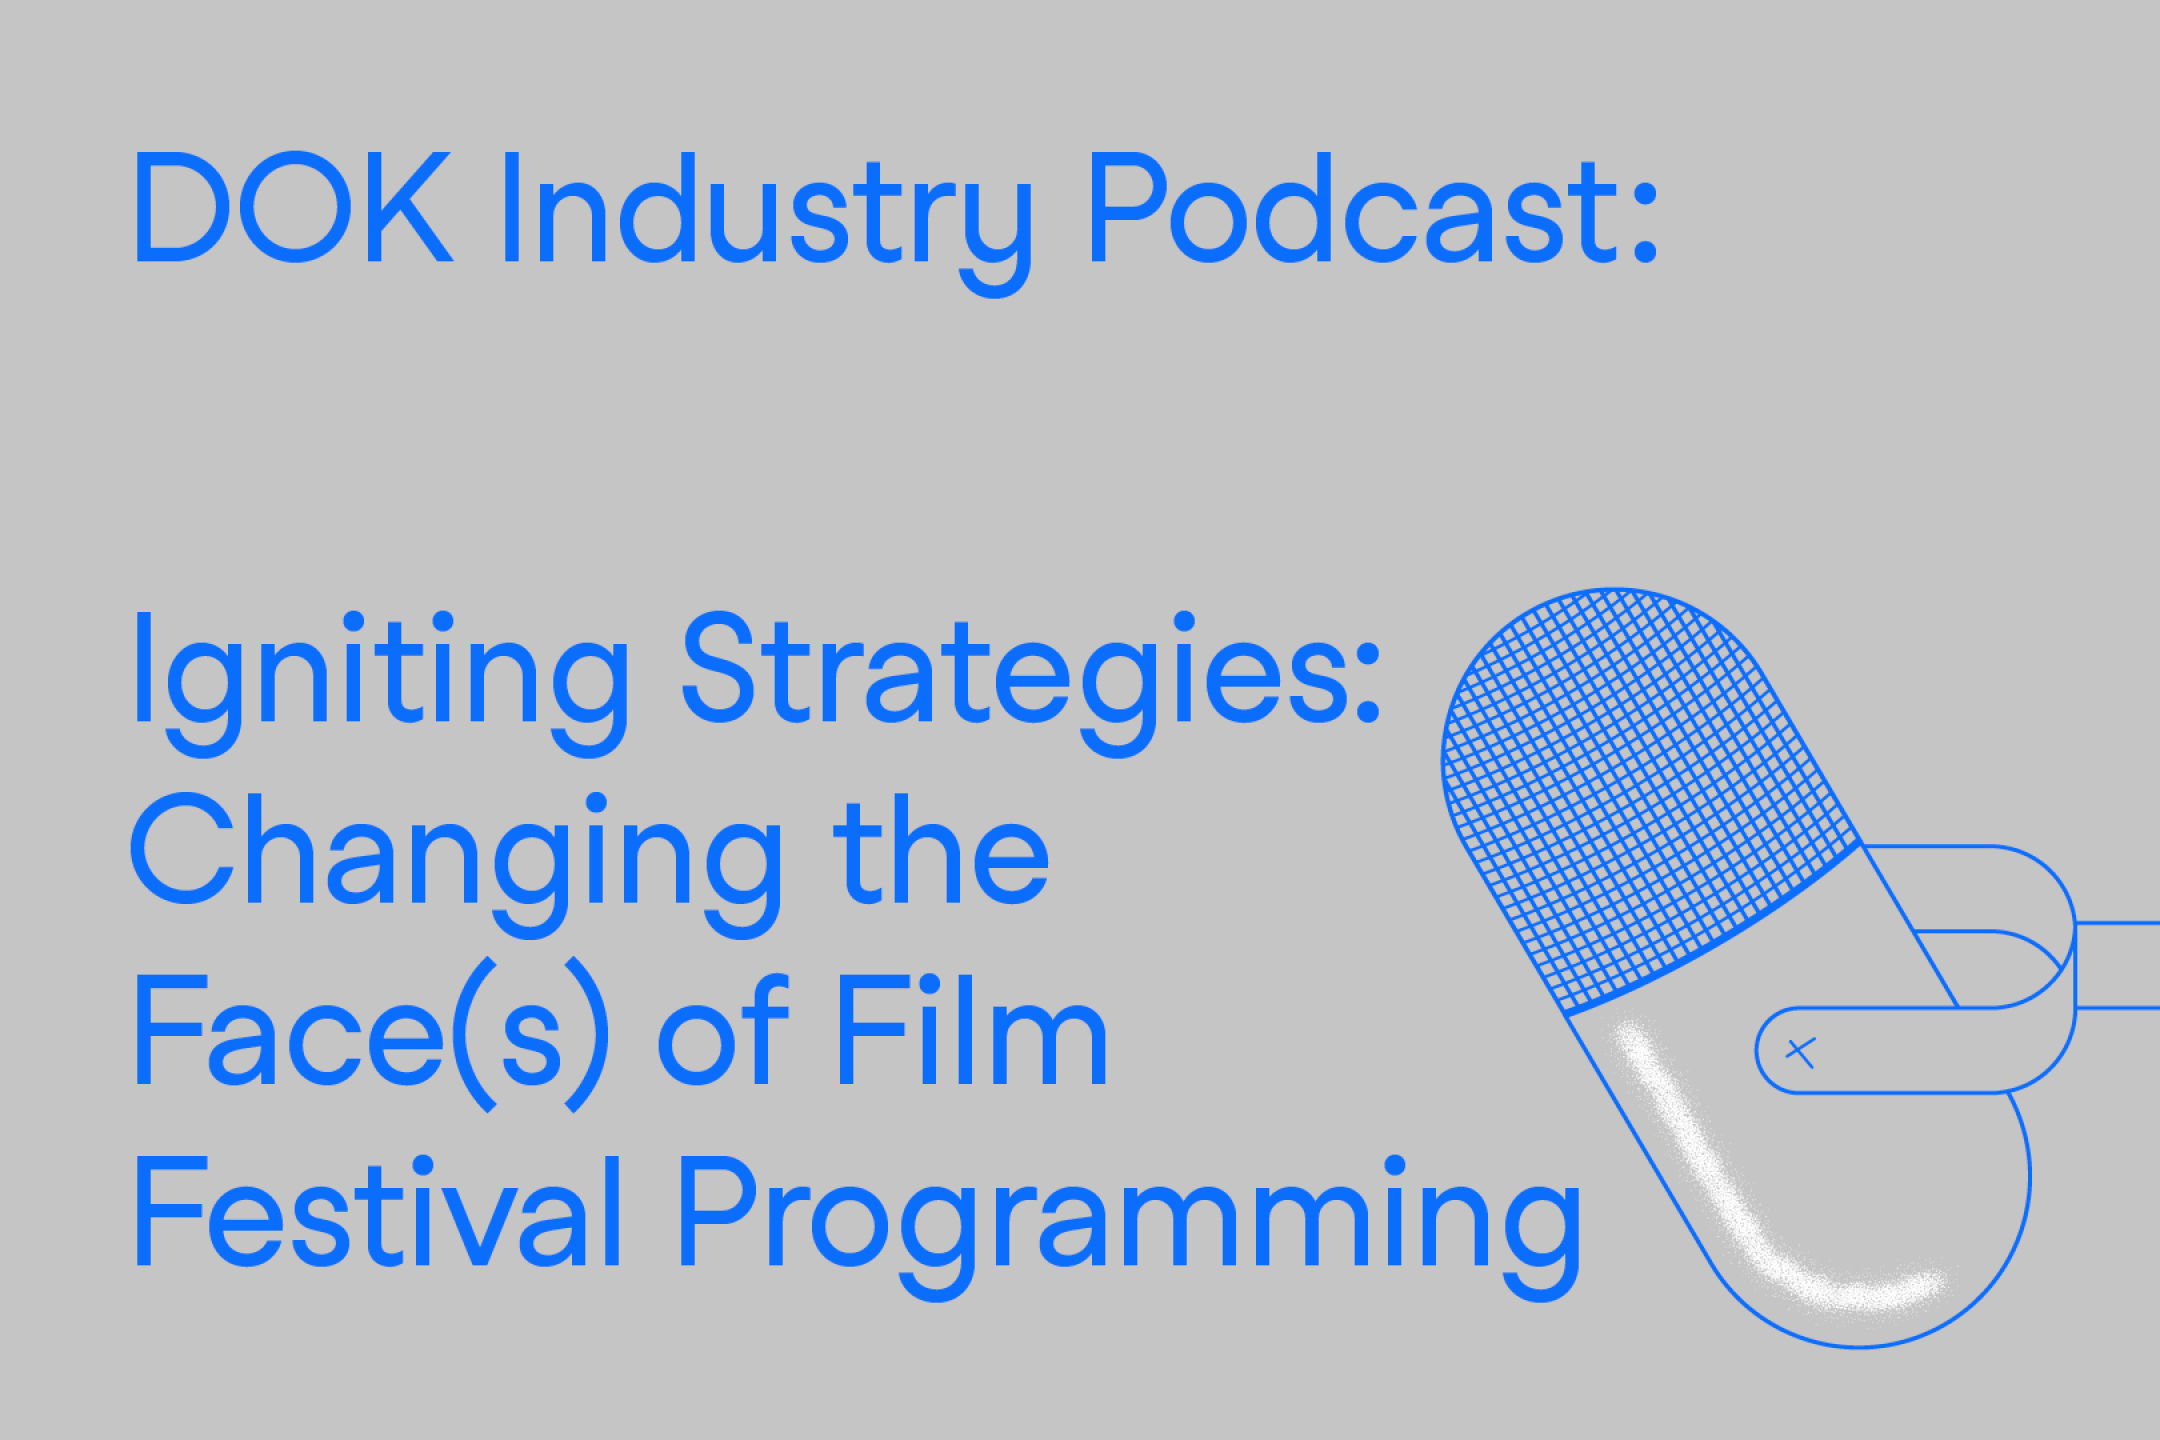 A text graphic: At the right a radio microphone in blue, at the left the text: "DOK Industry Podcast: Igniting Strategies"